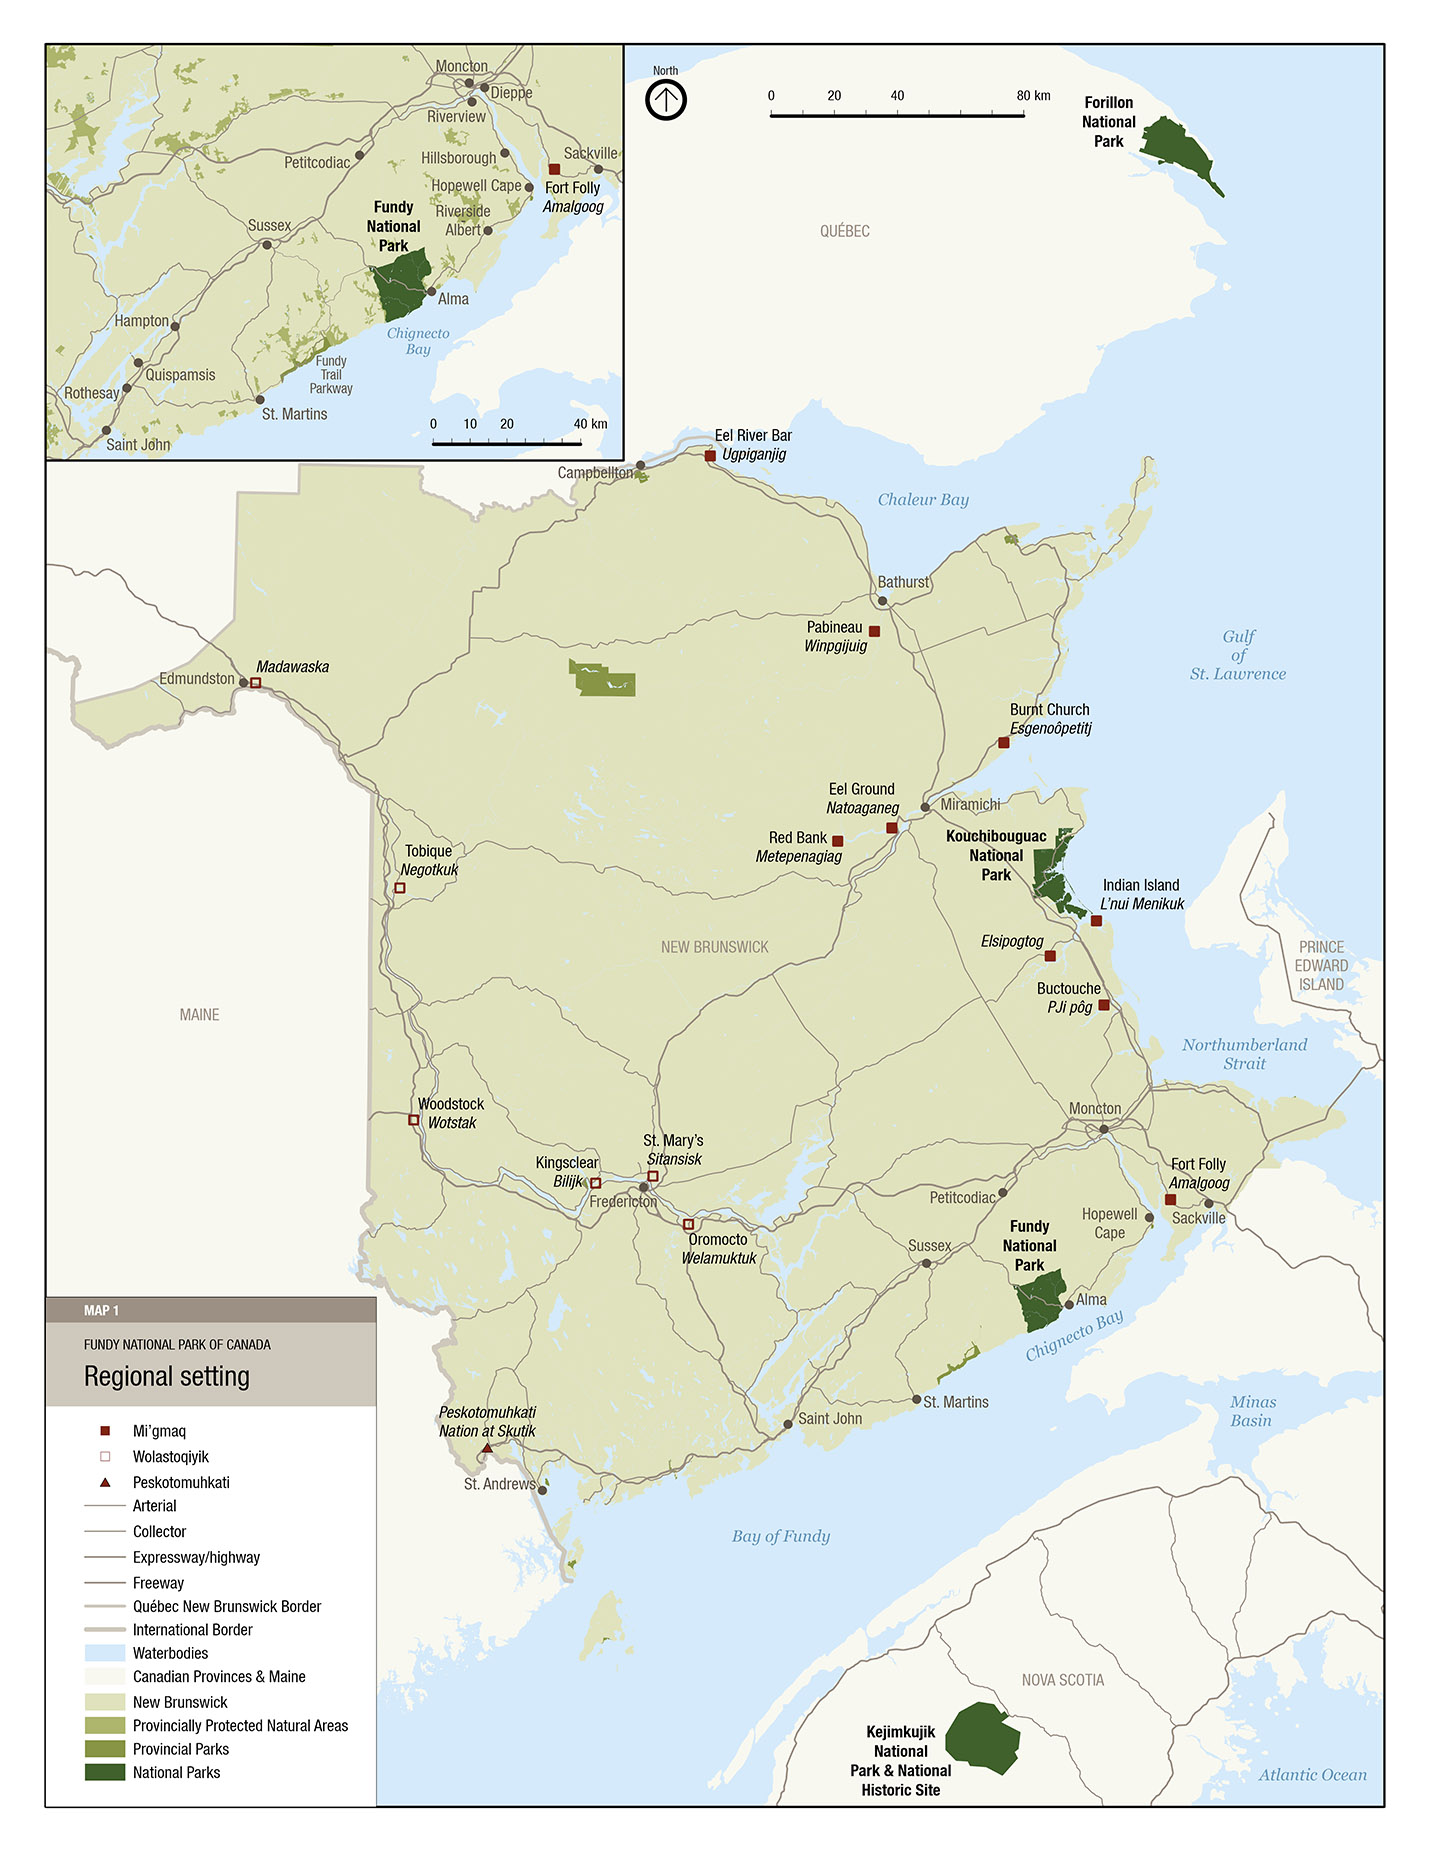 The map shows the regional geographic setting of Fundy National Park.